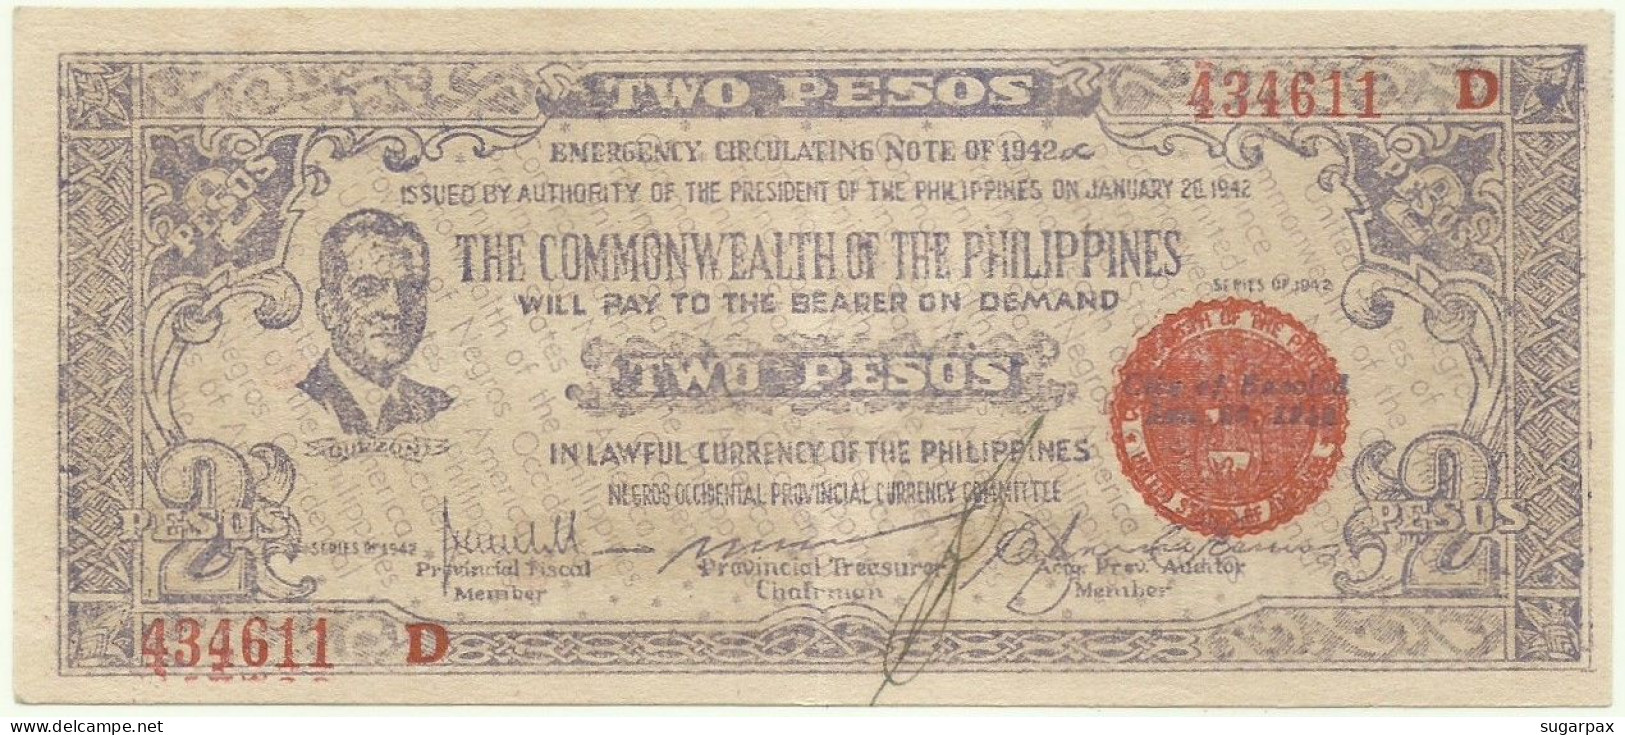 PHILIPPINES - 2 Pesos - 1942 - Pick S 647B - Serie D - NEGROS Occidental Provincial Currency Committee - Filipinas